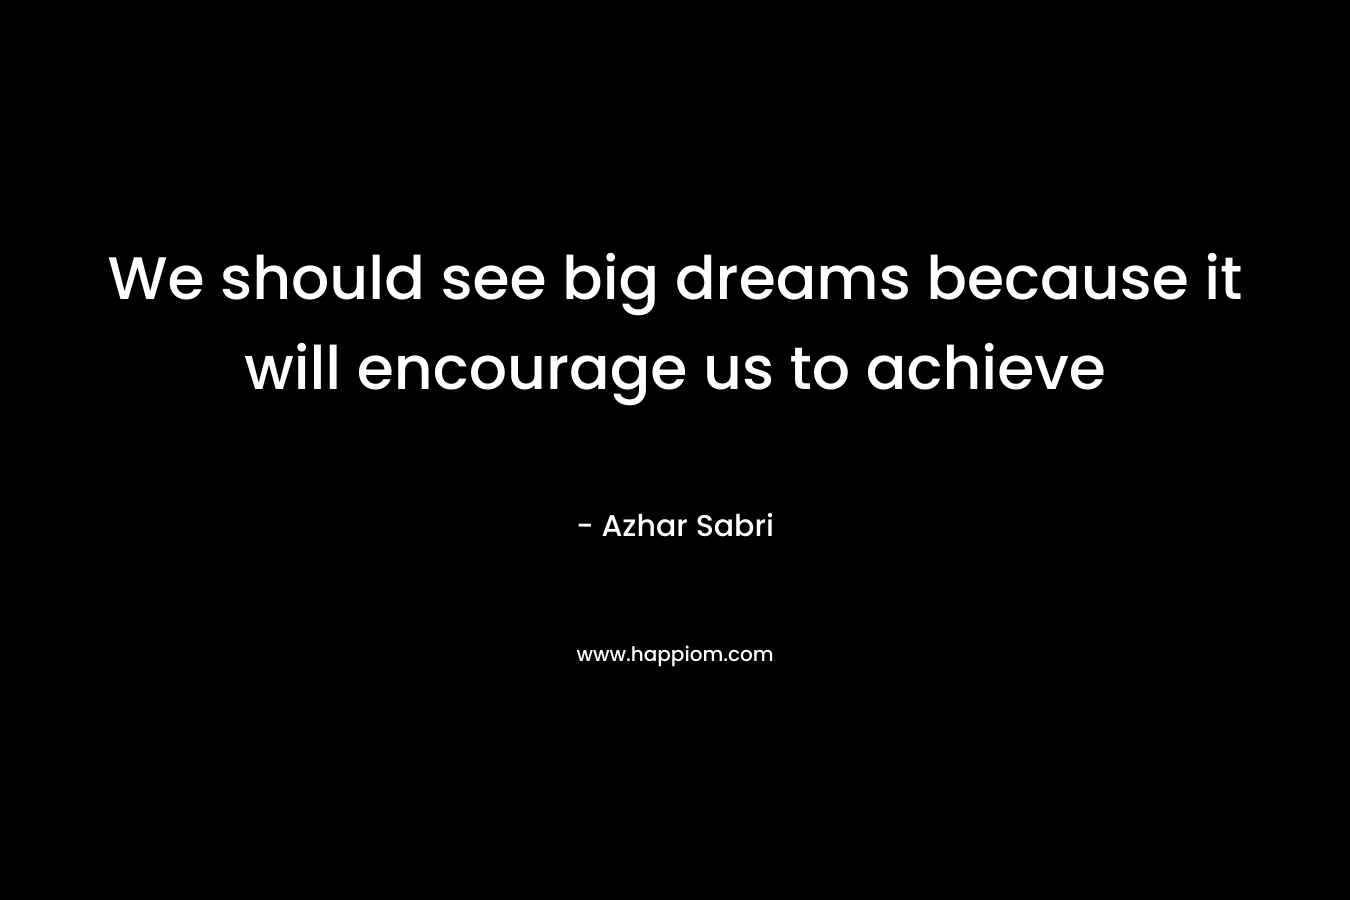 We should see big dreams because it will encourage us to achieve – Azhar Sabri